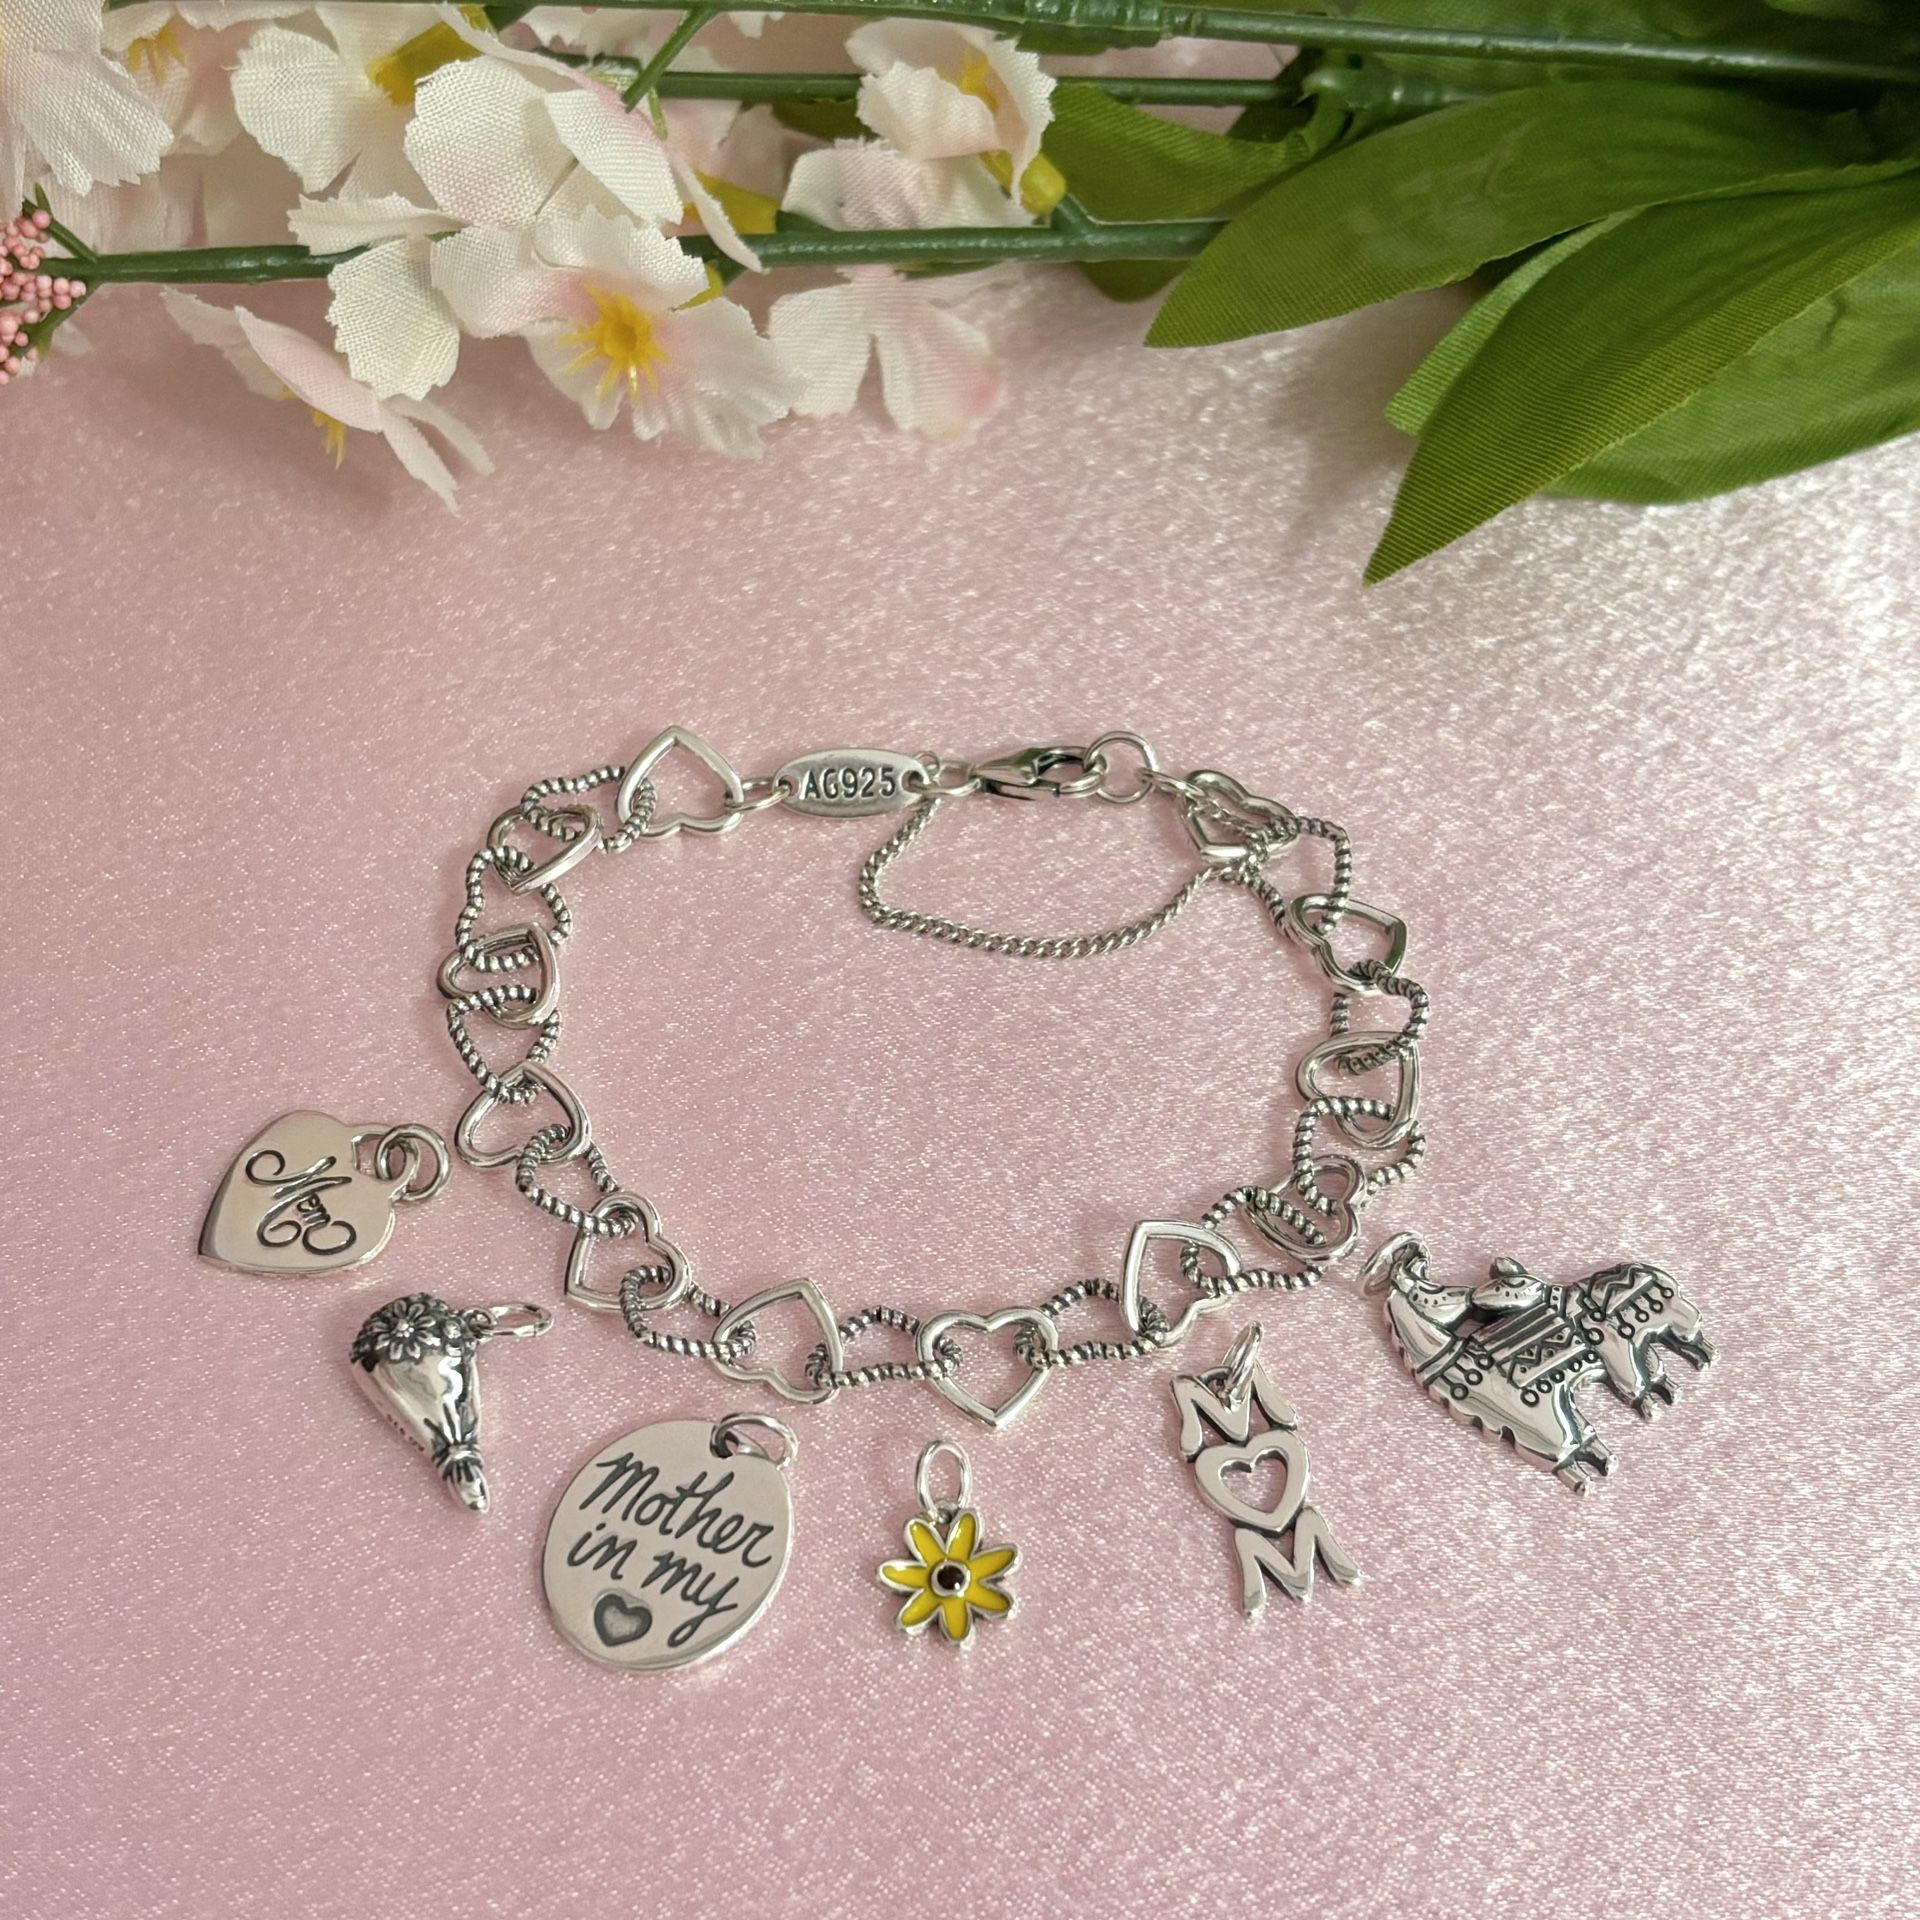 Bracelet And Charms ( Sold Separately)